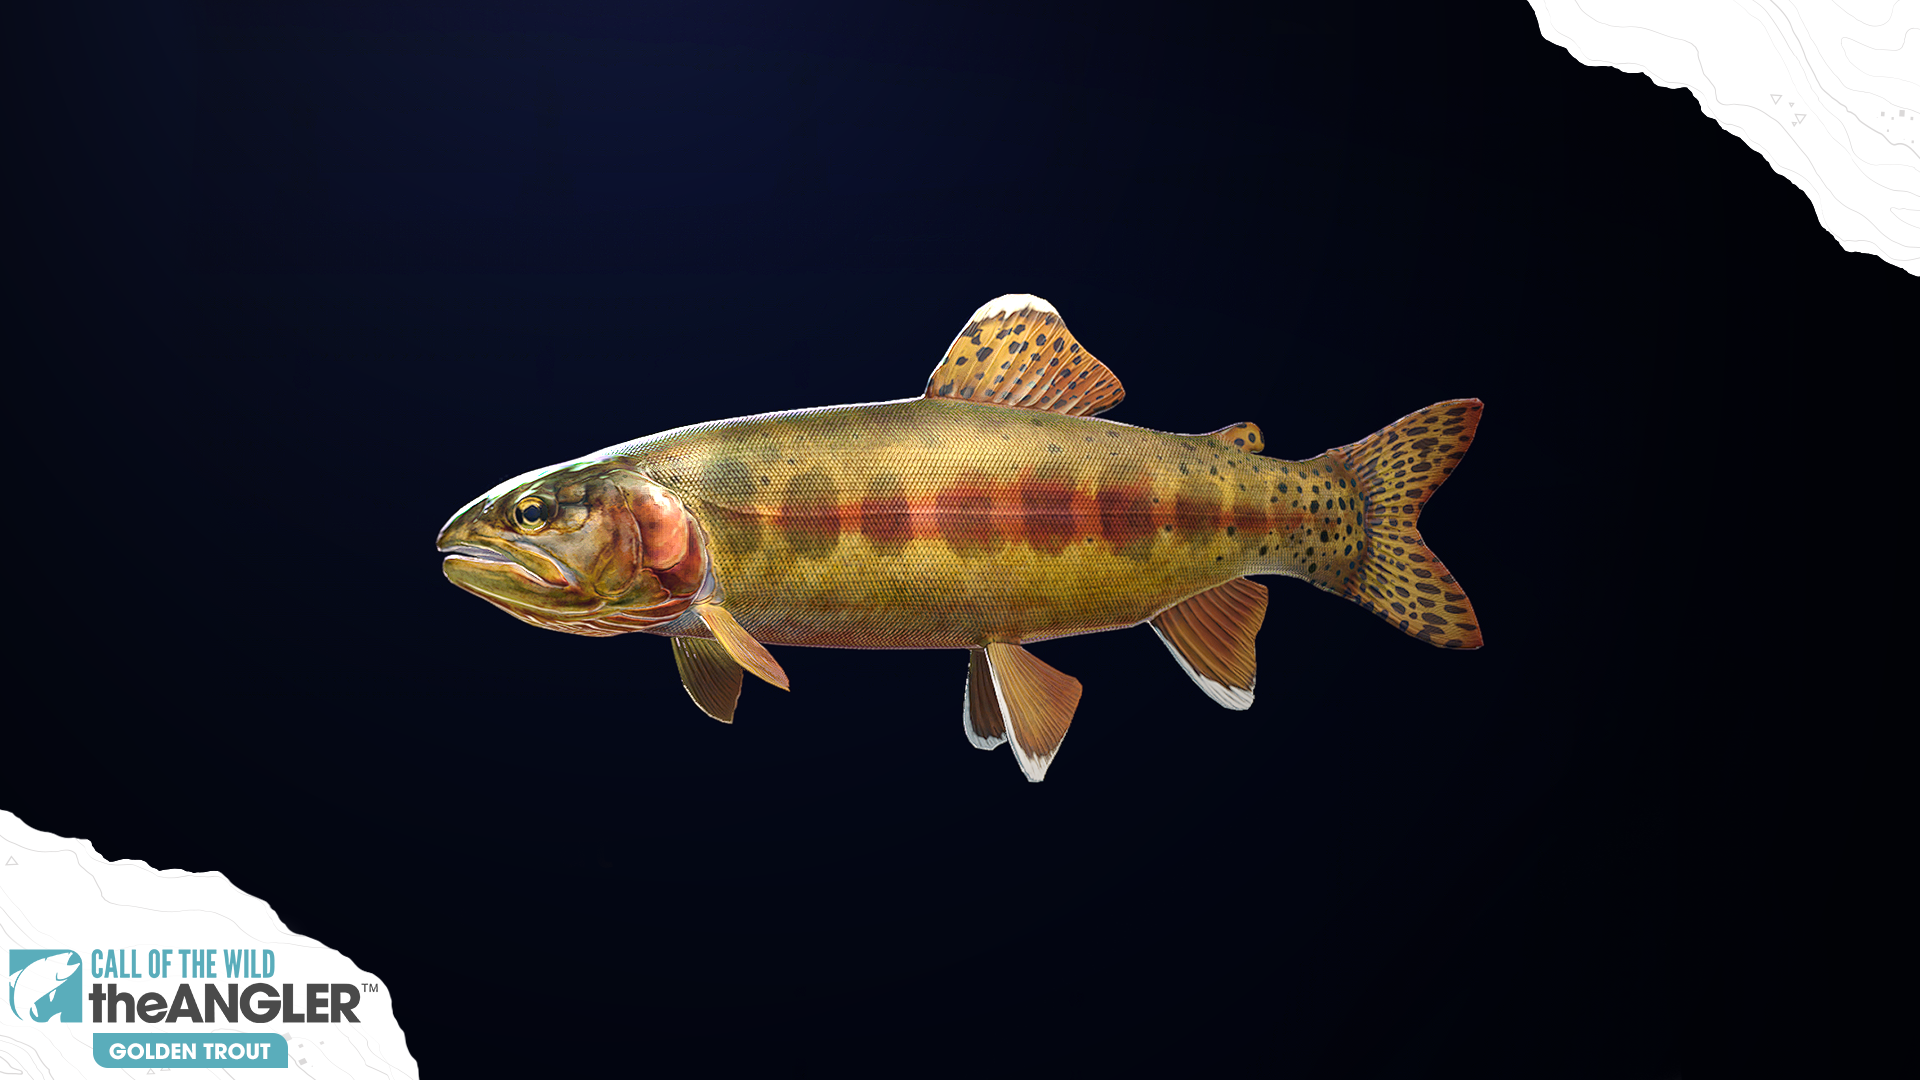 An image of the fish species, Golden Trout.